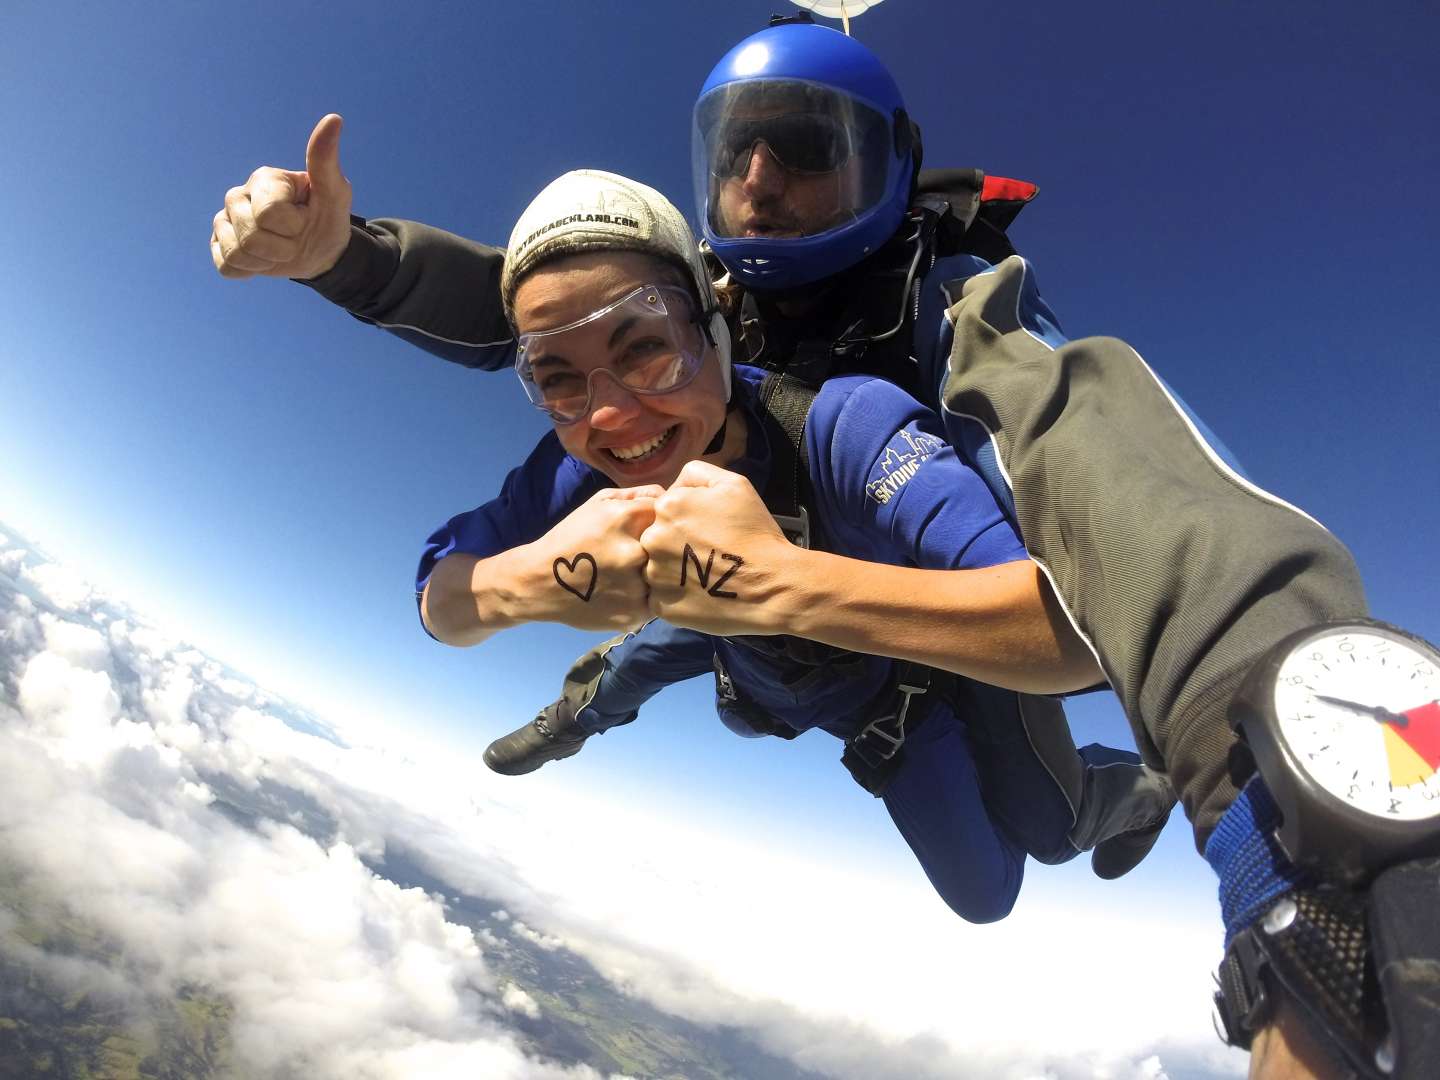 Skydive Auckland, the ultimate tandem skydive destination in New Zealand